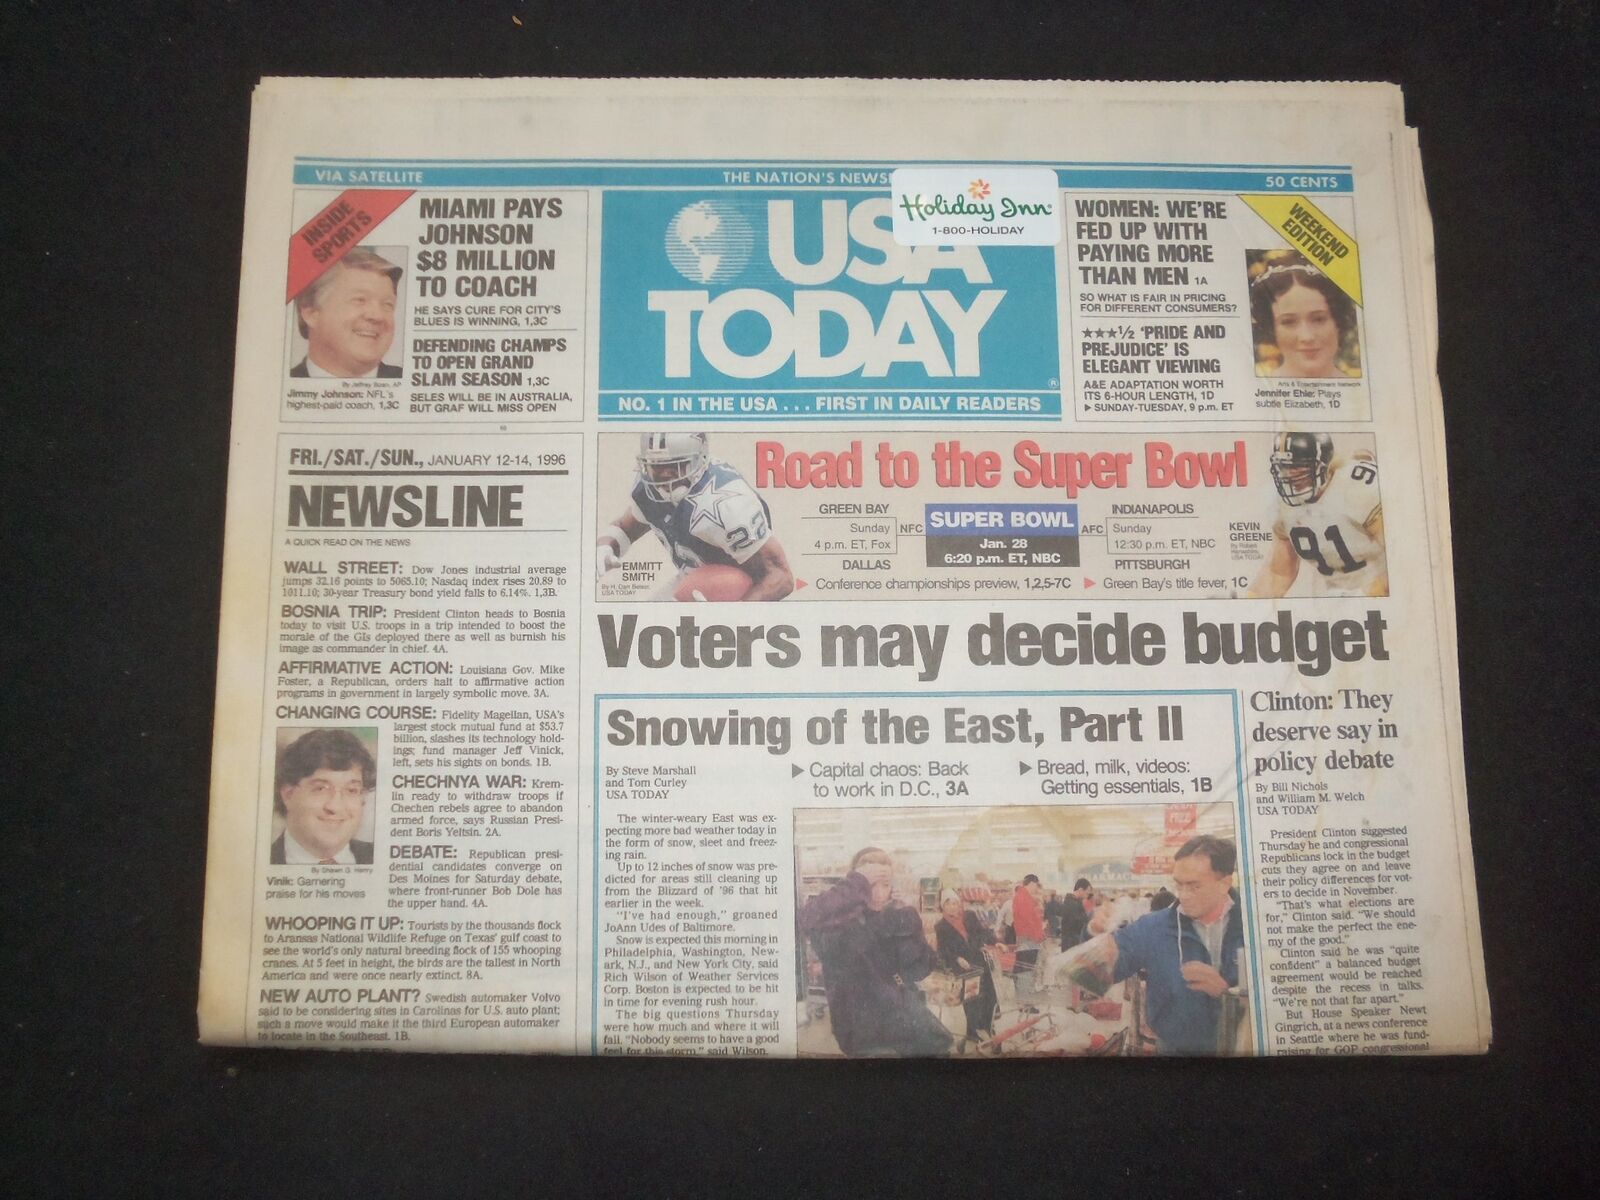 1996 JANUARY 12-14 USA TODAY NEWSPAPER - VOTERS MAY DECIDE BUDGET - NP 7808